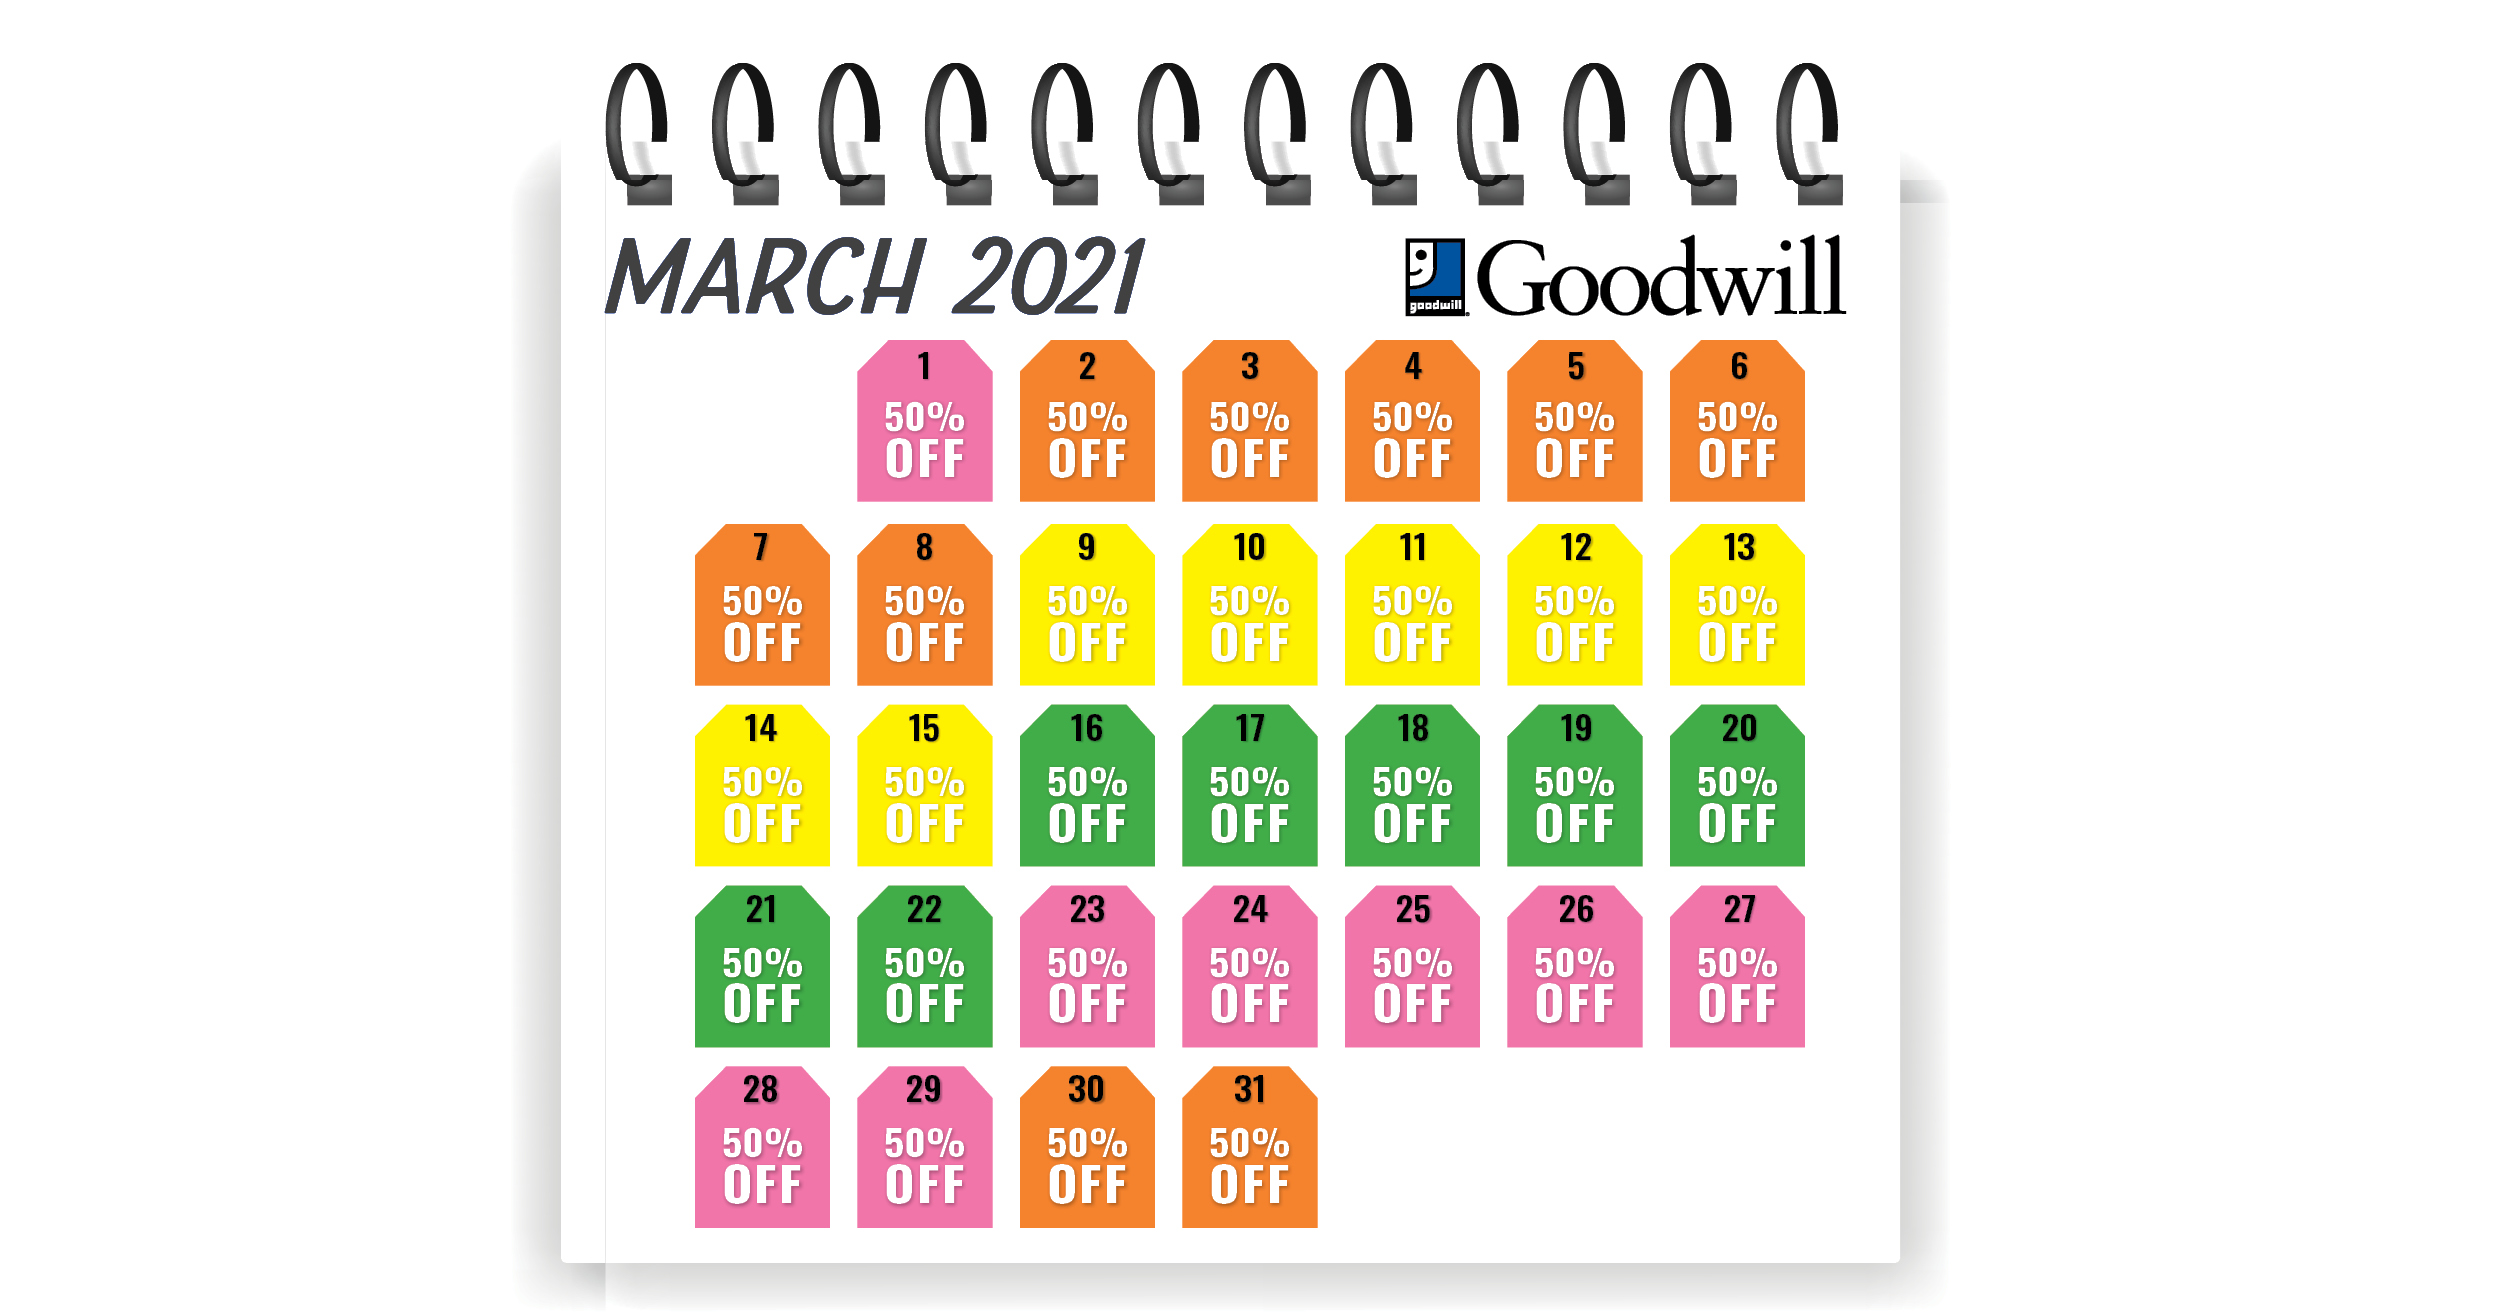 Learn How You Can Save 50% On Select Merchandise Every Day at Goodwill!